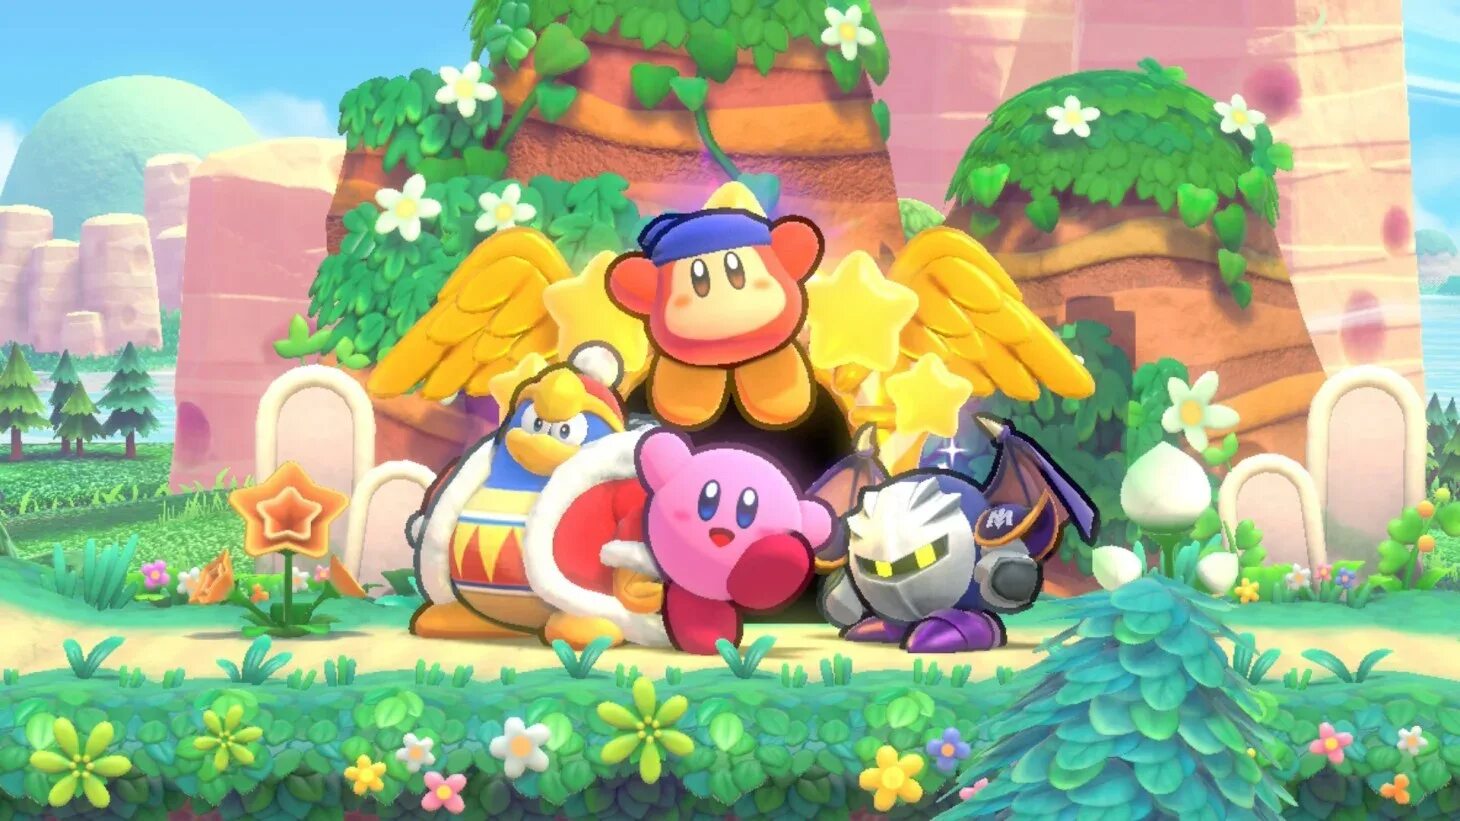 Dreamland Deluxe Kirby. Kirby s Return to Dream Land Deluxe. Кирби Return to Dreamland. Kirby's Return to Dream Land Deluxe.